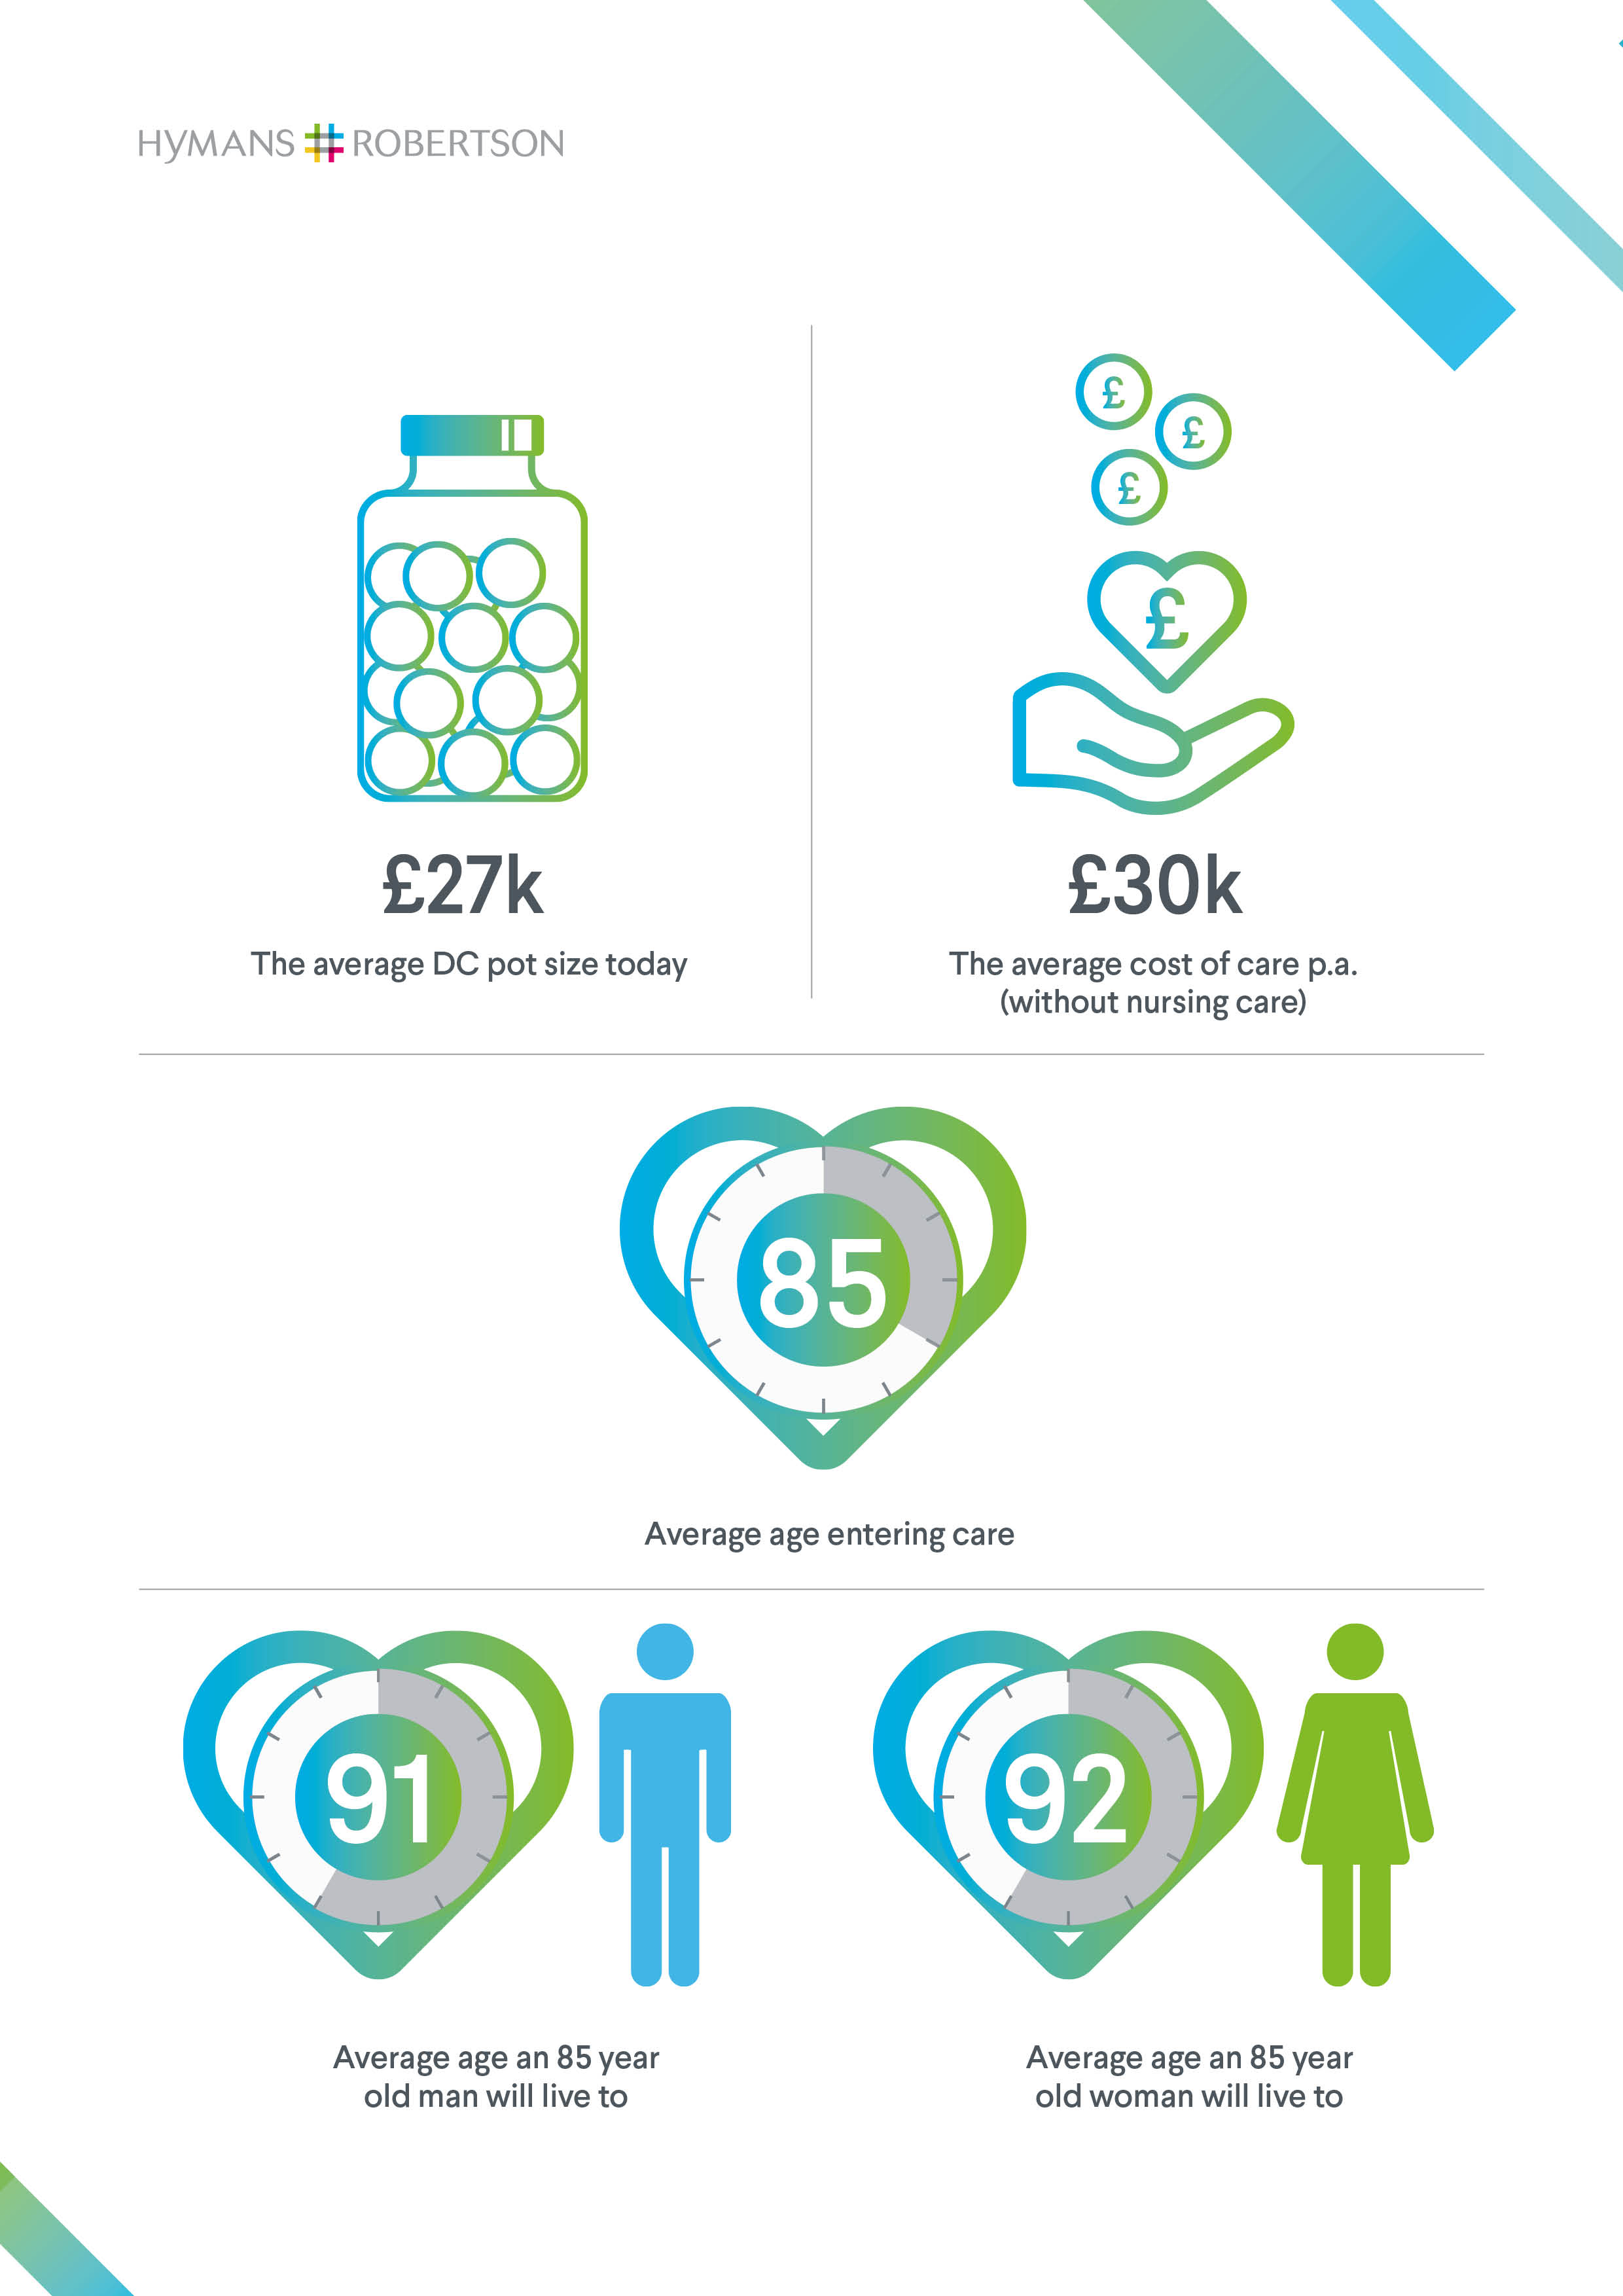 Pension pots are not big enough to pay for care infographic